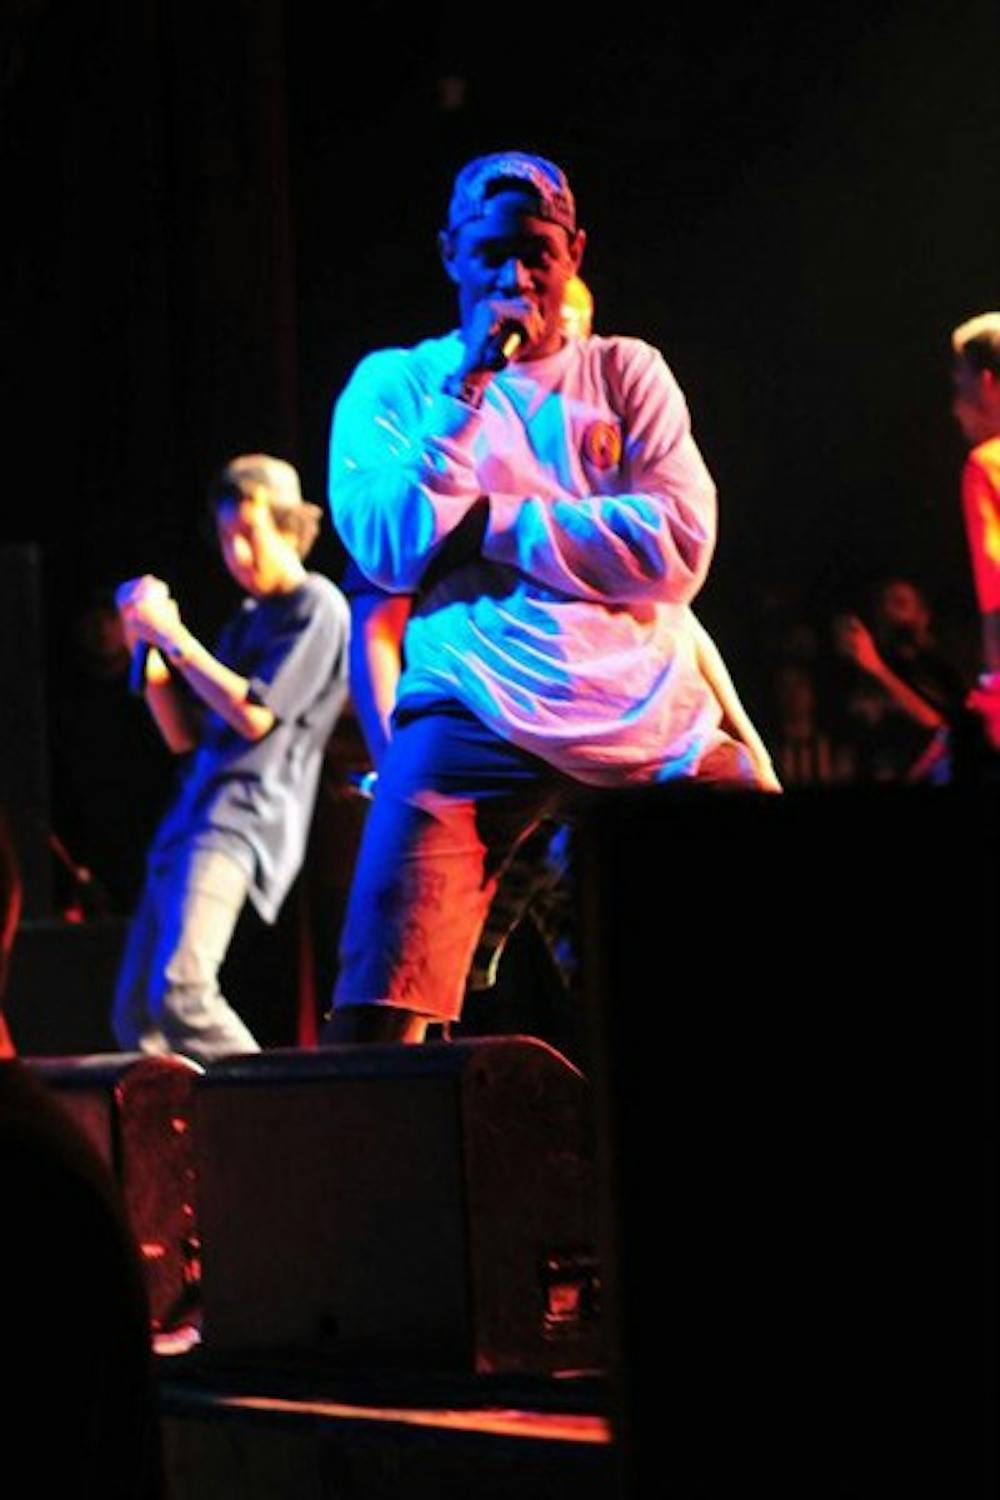 Hip-hop group Odd Future performs at the Marquee Theatre in Tempe March 9. (Photo by Cheman Cuan)